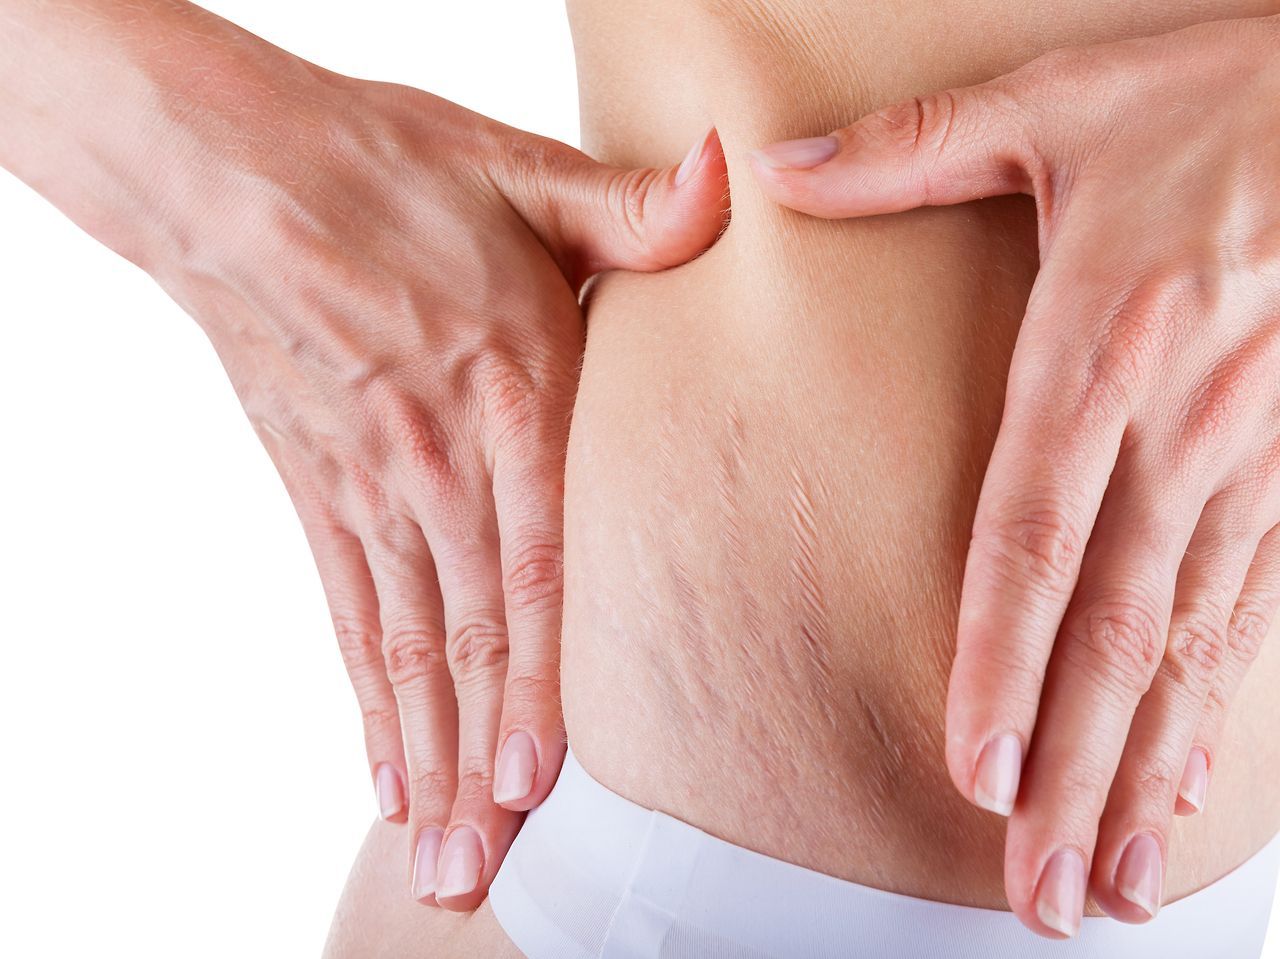 Top 10 Ways to Get Rid of Stretch Marks Fast